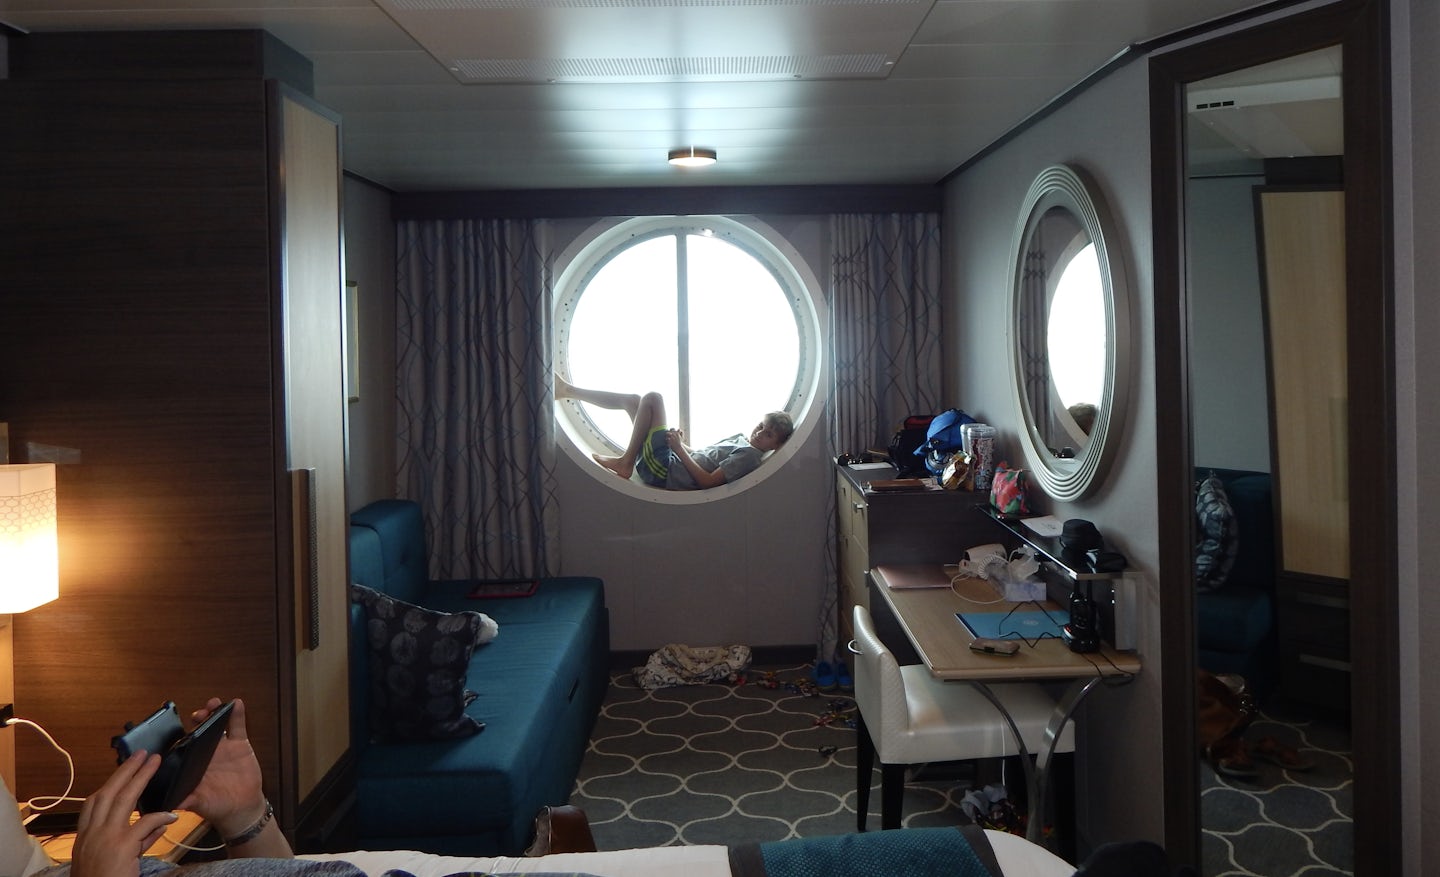 Our ocean view stateroom